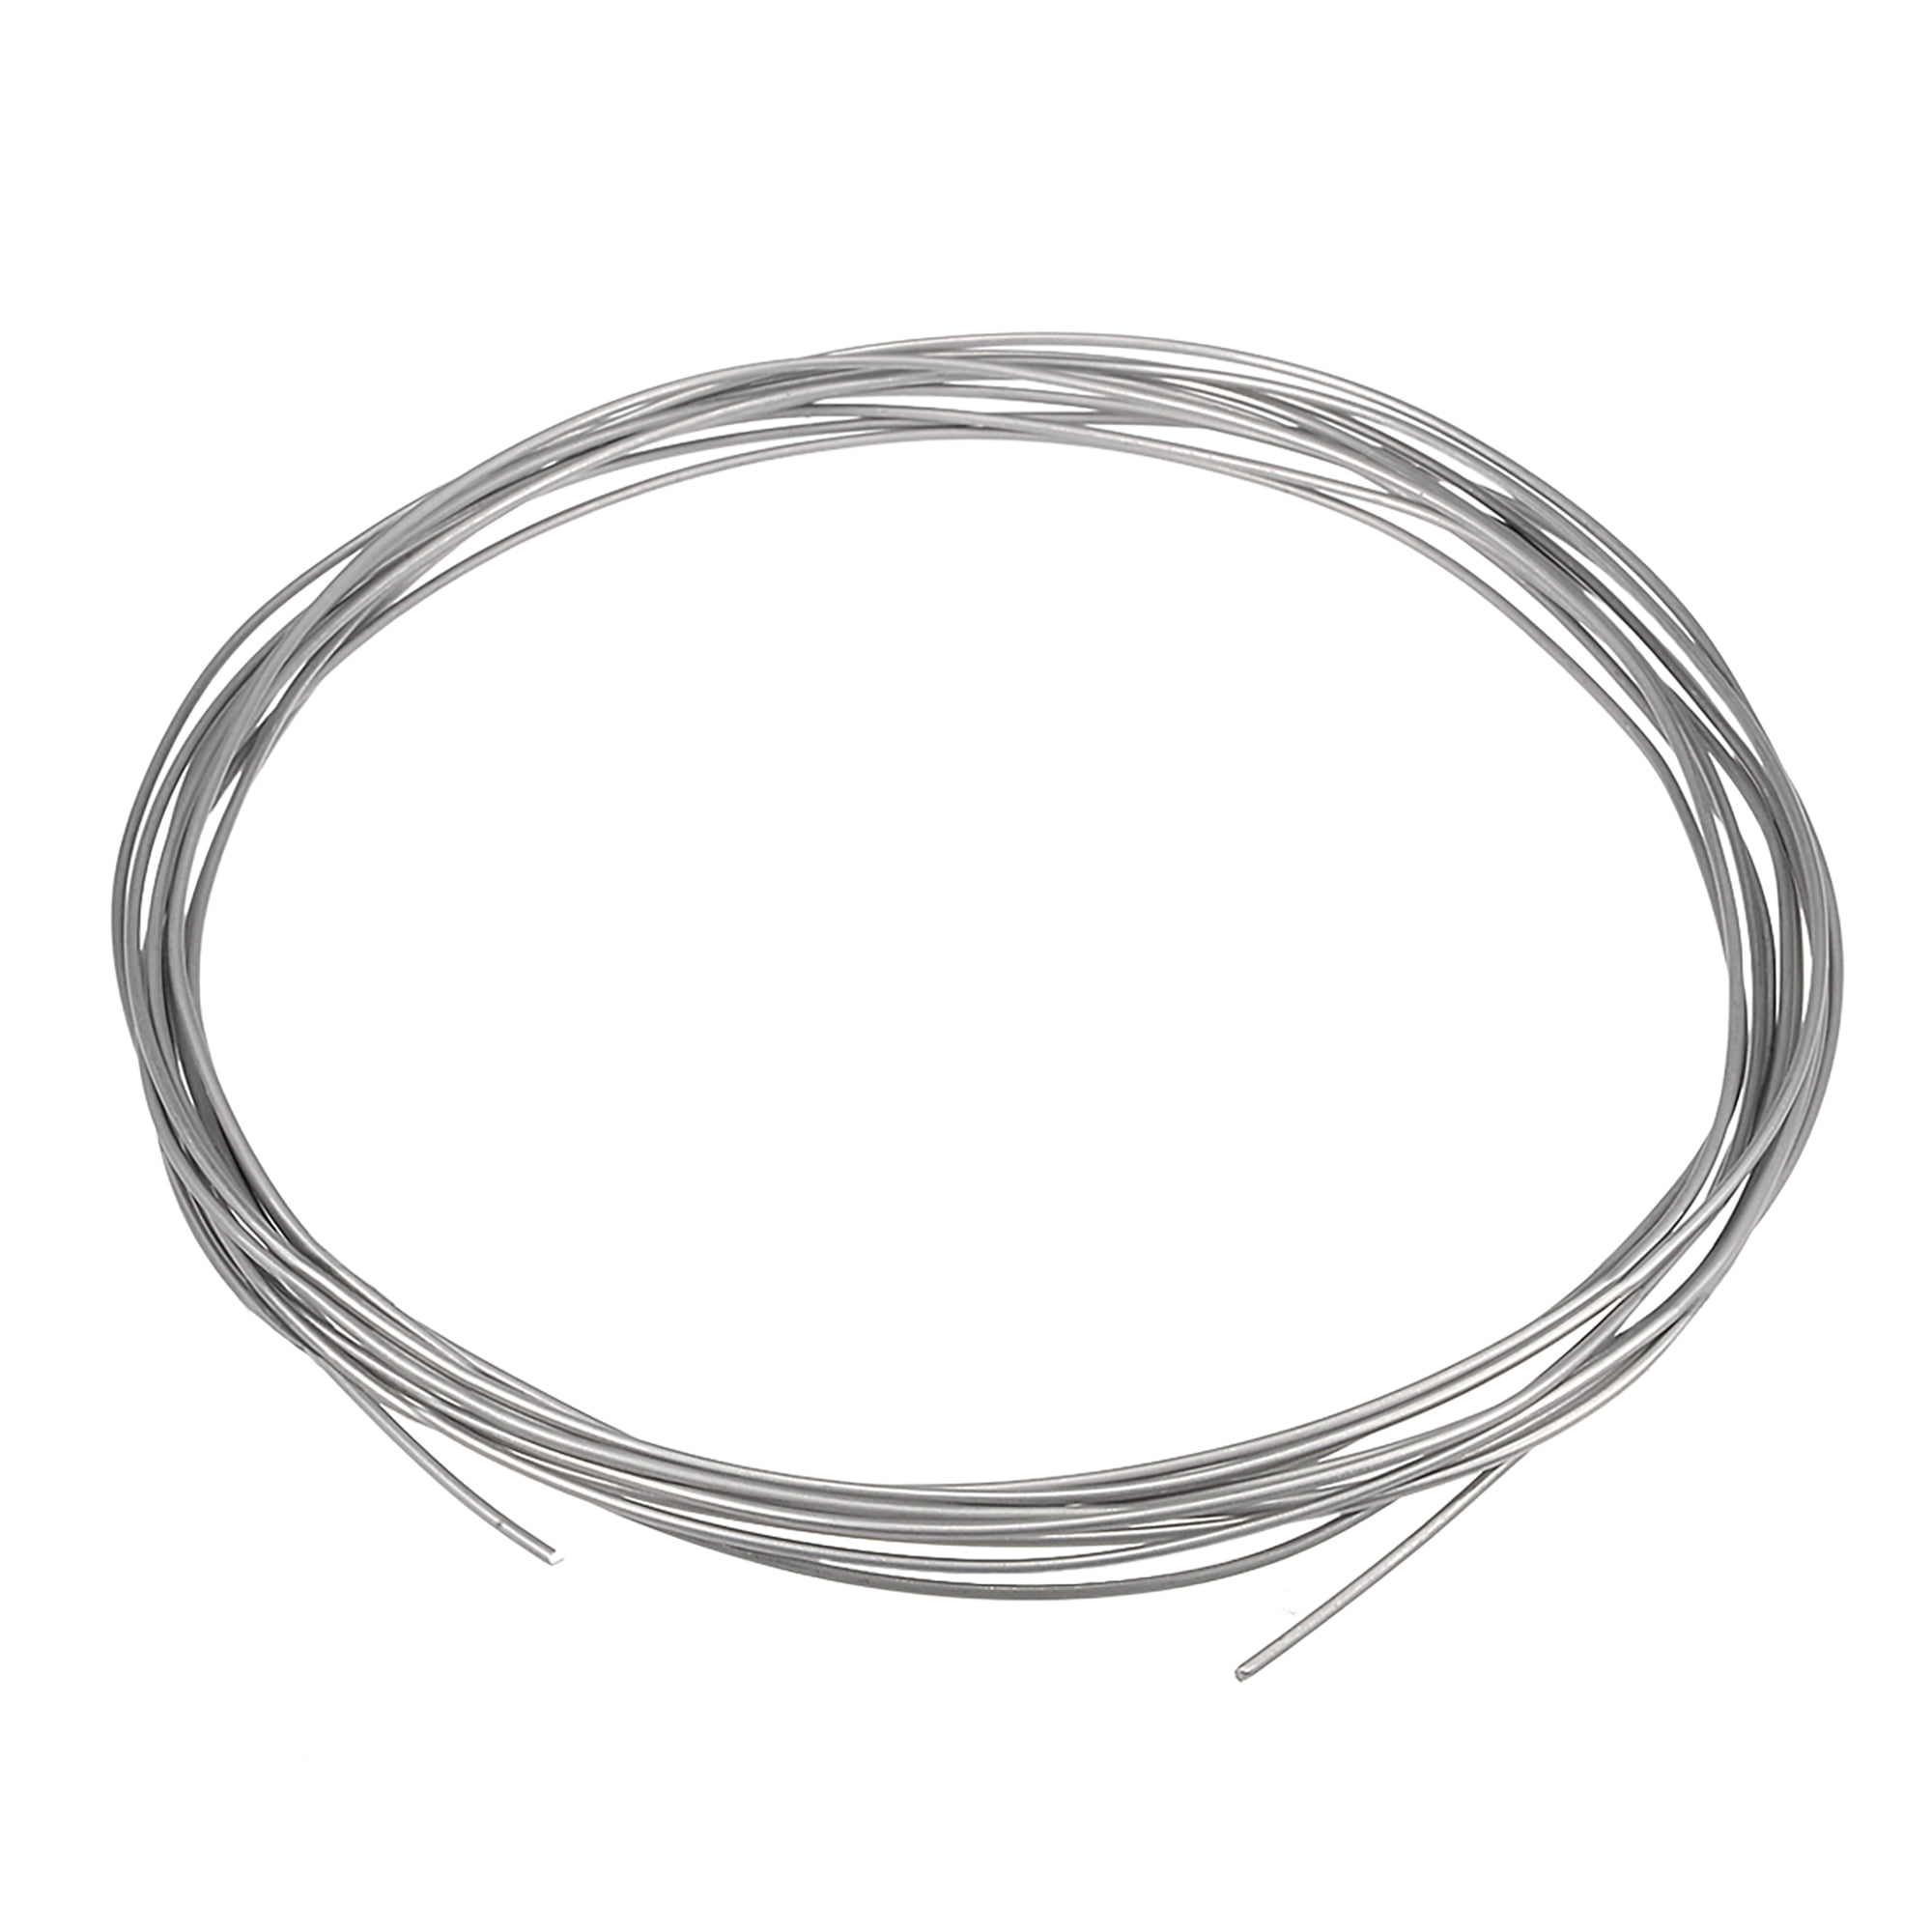 0.8mm 20AWG Heating Resistor Wire Wrapping, Nichrome Resistance Wires for  Heating Elements 65.6ft